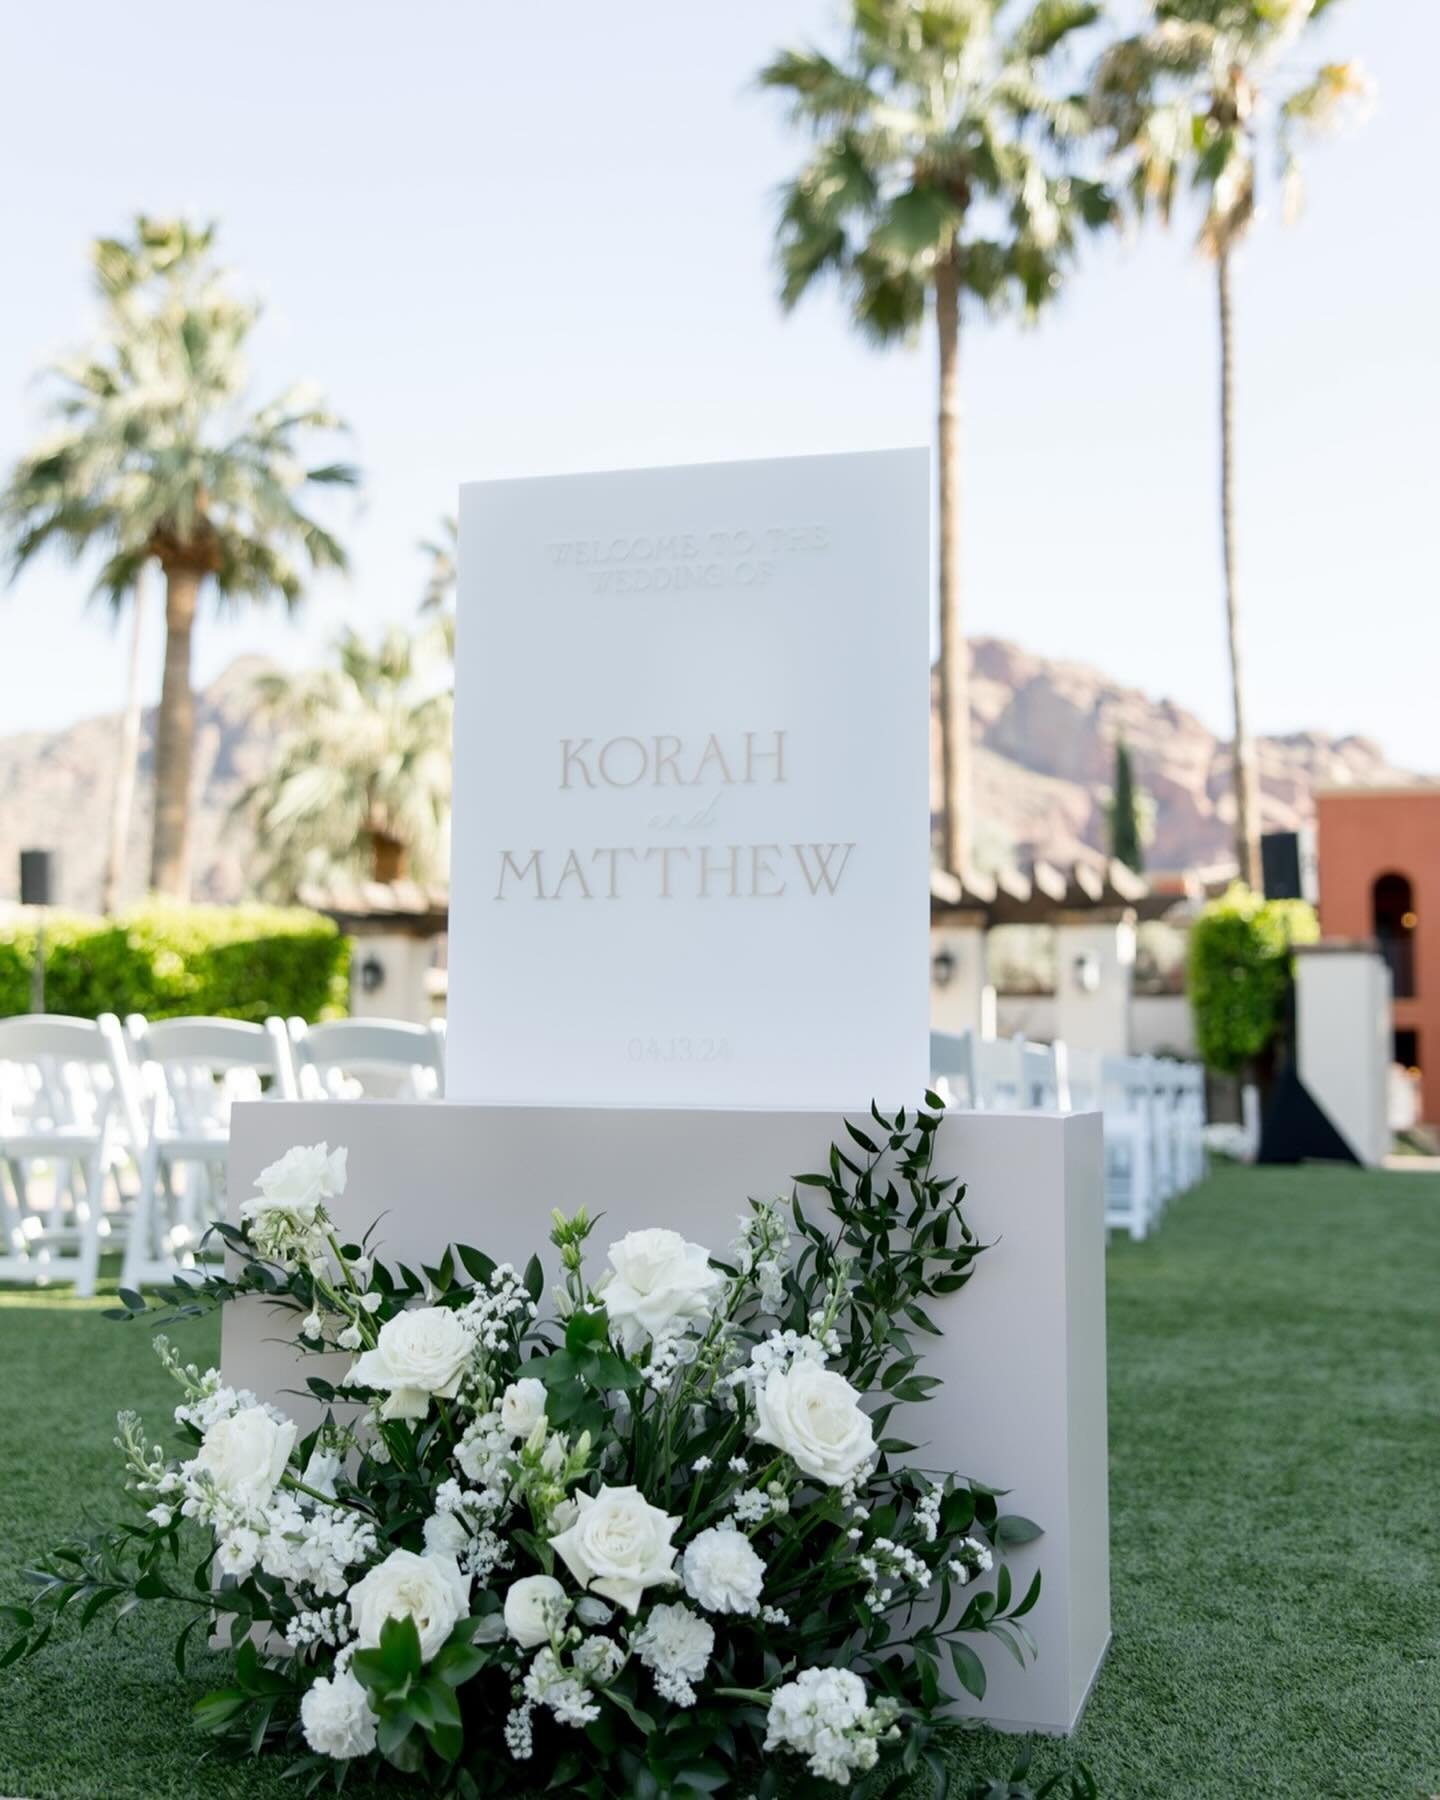 Korah &amp; Matthew 🥂🕊️💍

We absolutely loved working with this beautiful couple on the signage for their wedding. The details were everything 🤍
.
Newley Weds: @korahhopton 
Coordination: @adaytocherishweddings
Venue: @omnimontelucia
Photographer